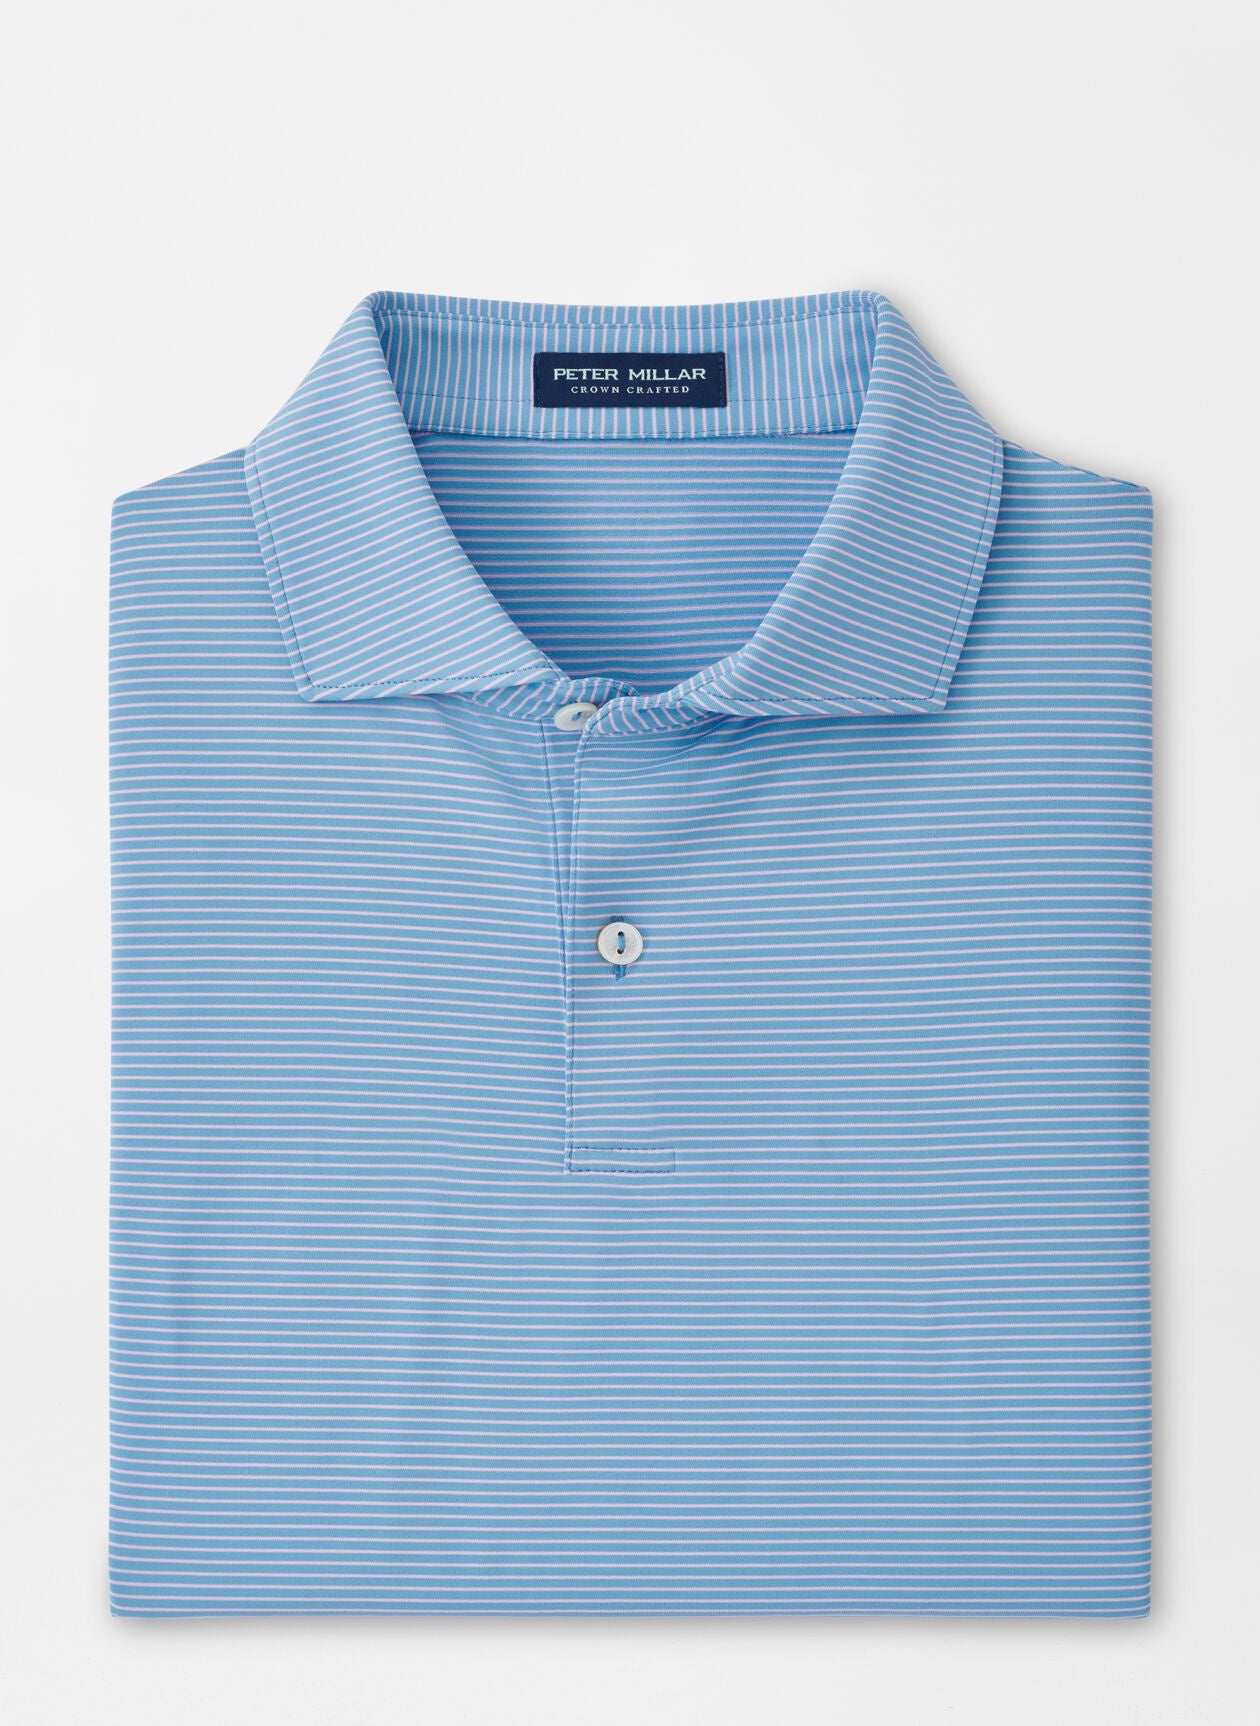 Peter Millar Indigo Performance Jersey Polo in Channel Blue